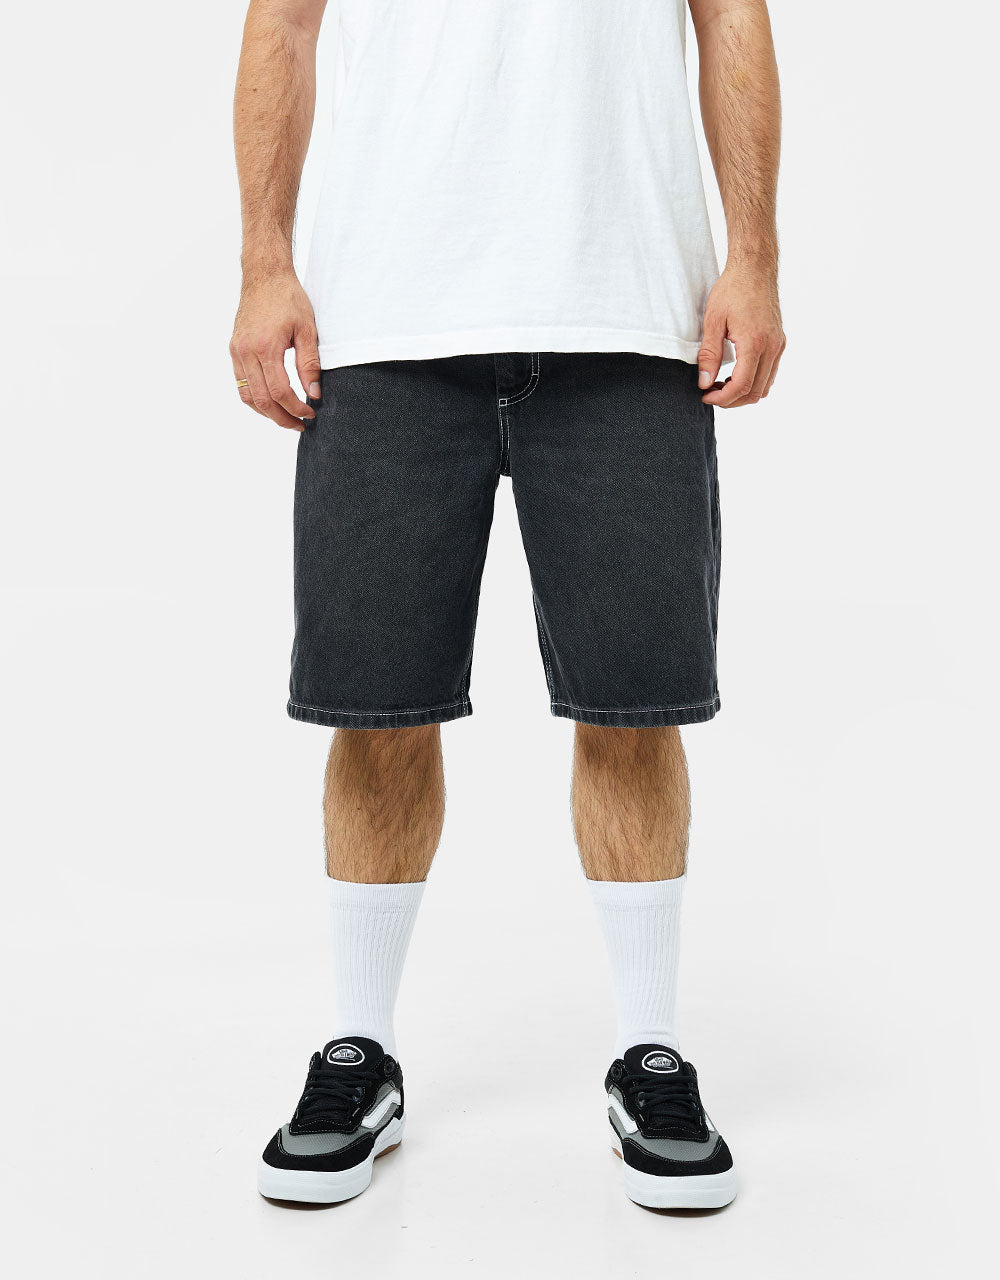 Route One Super Baggy Denim Shorts - Washed Black